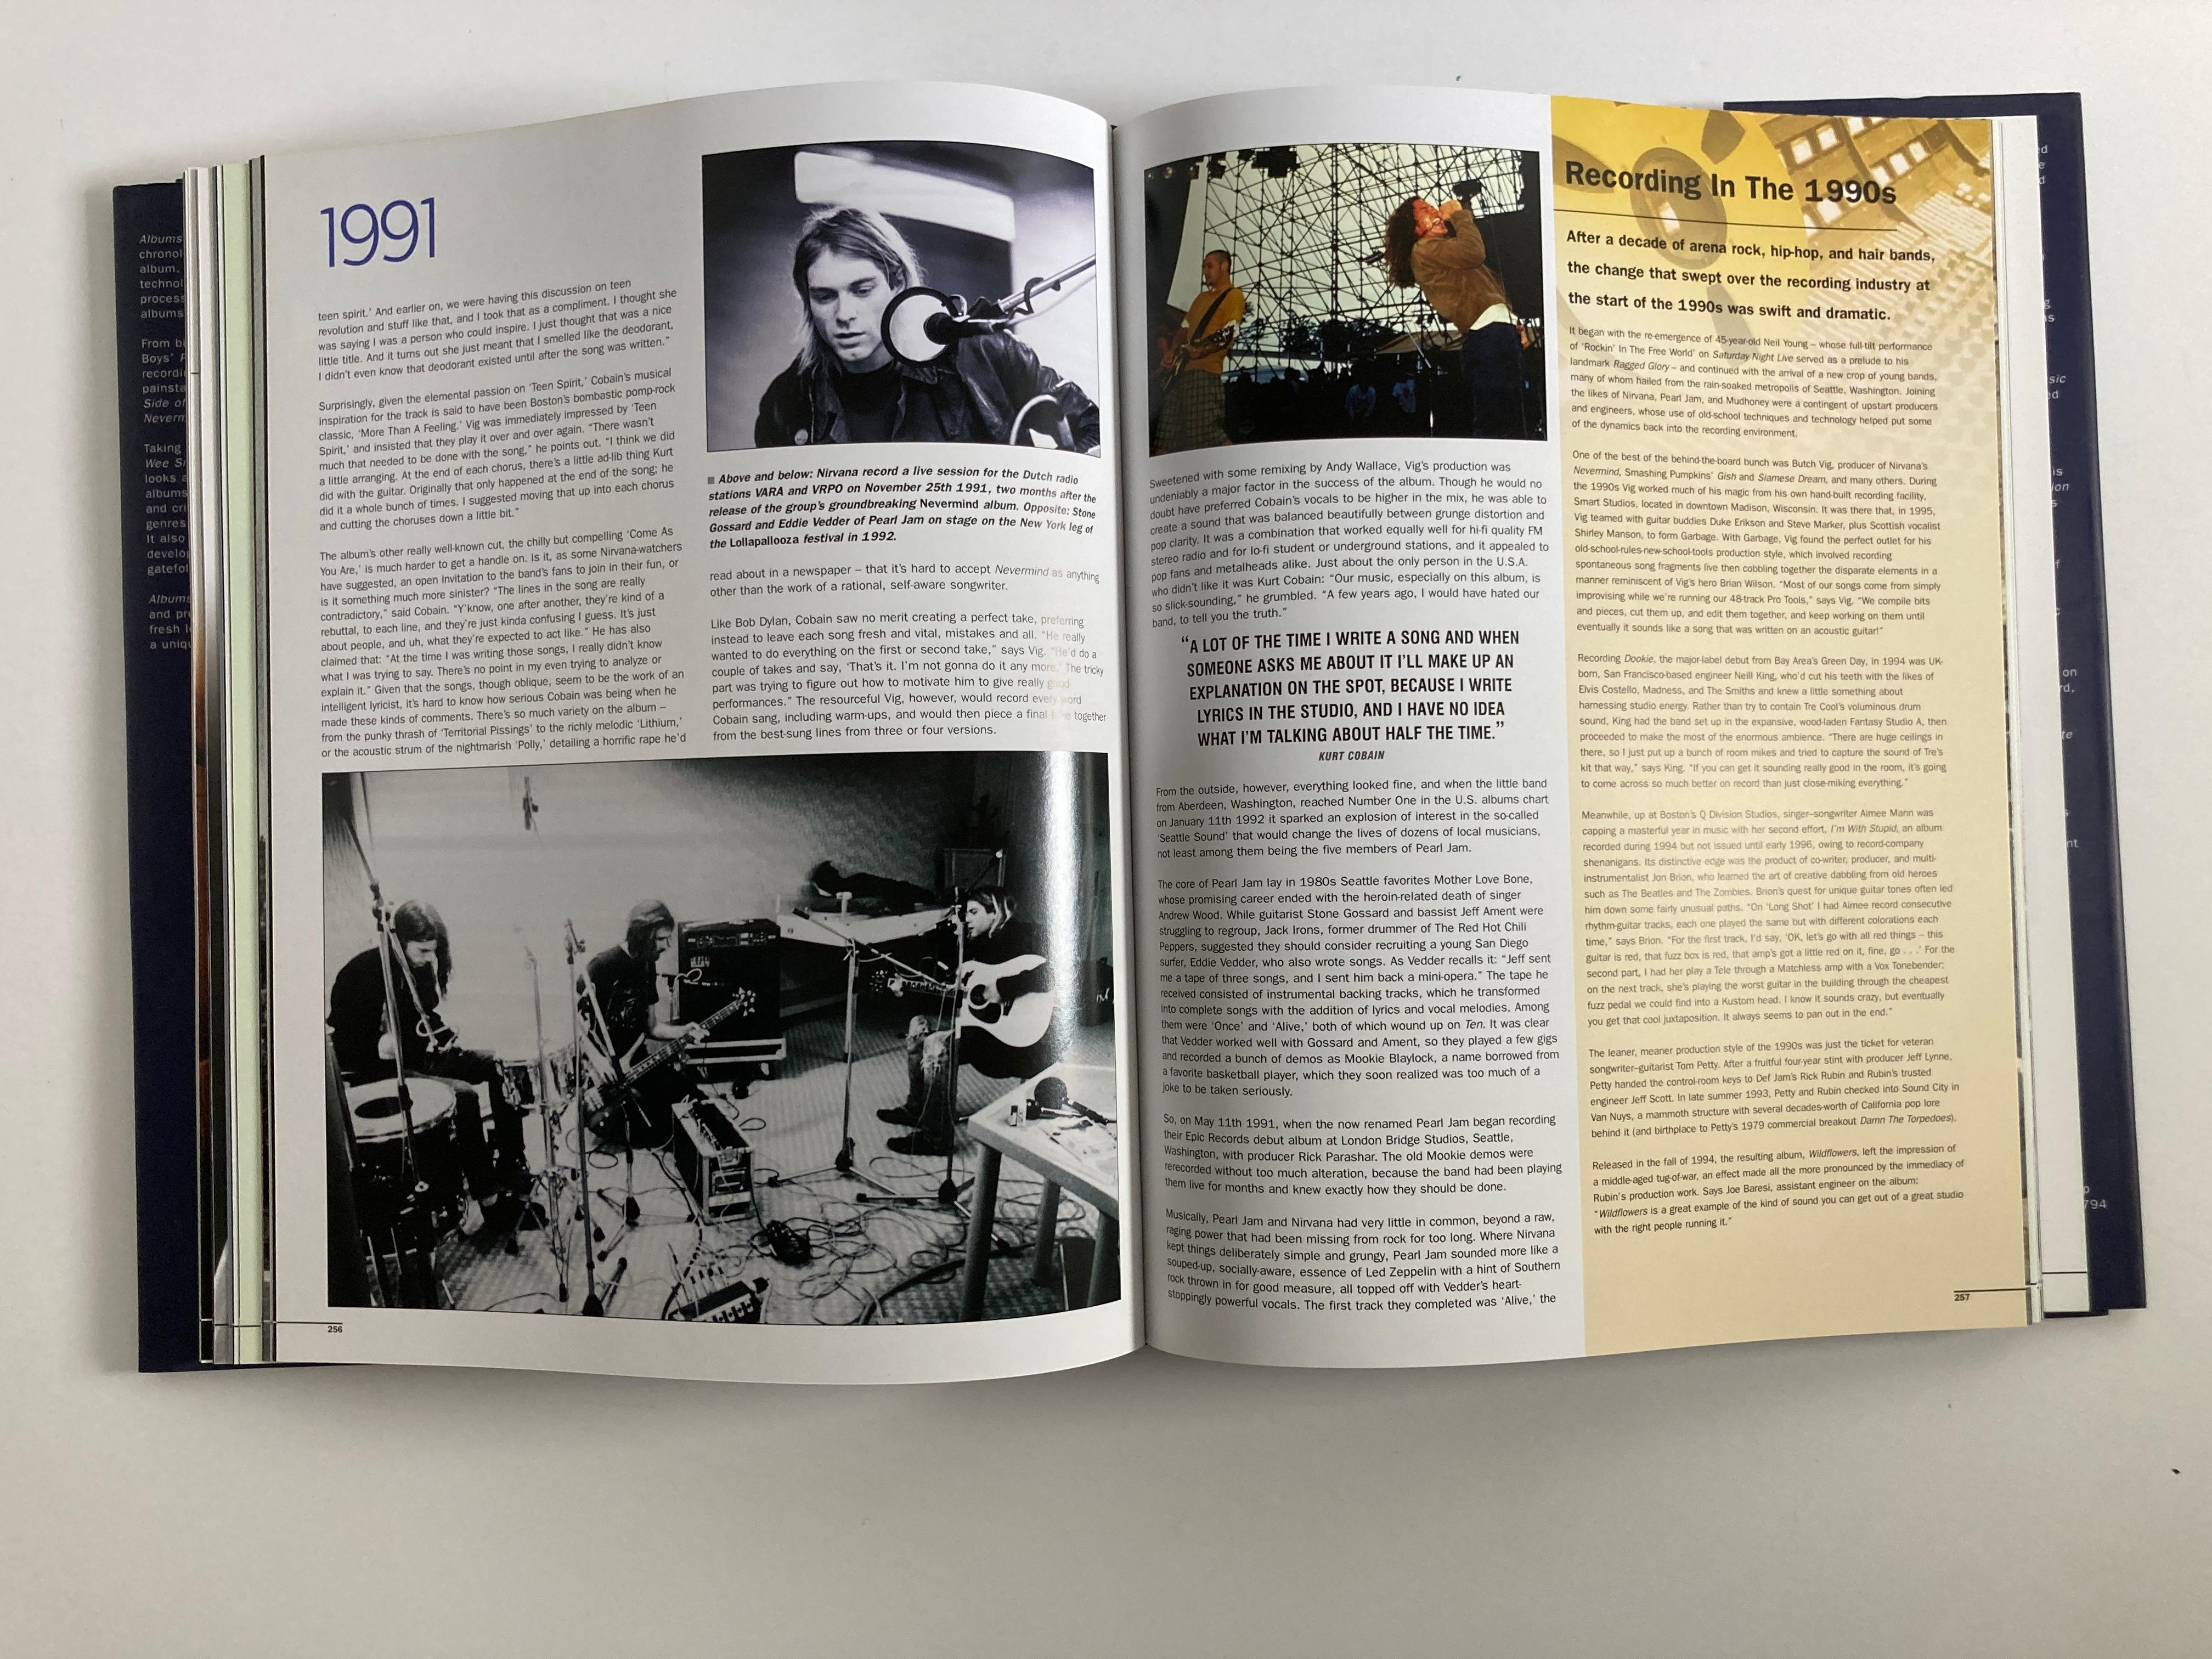 The Stories Behind 50 Years of Great Recordings Hardcover Table Book 3